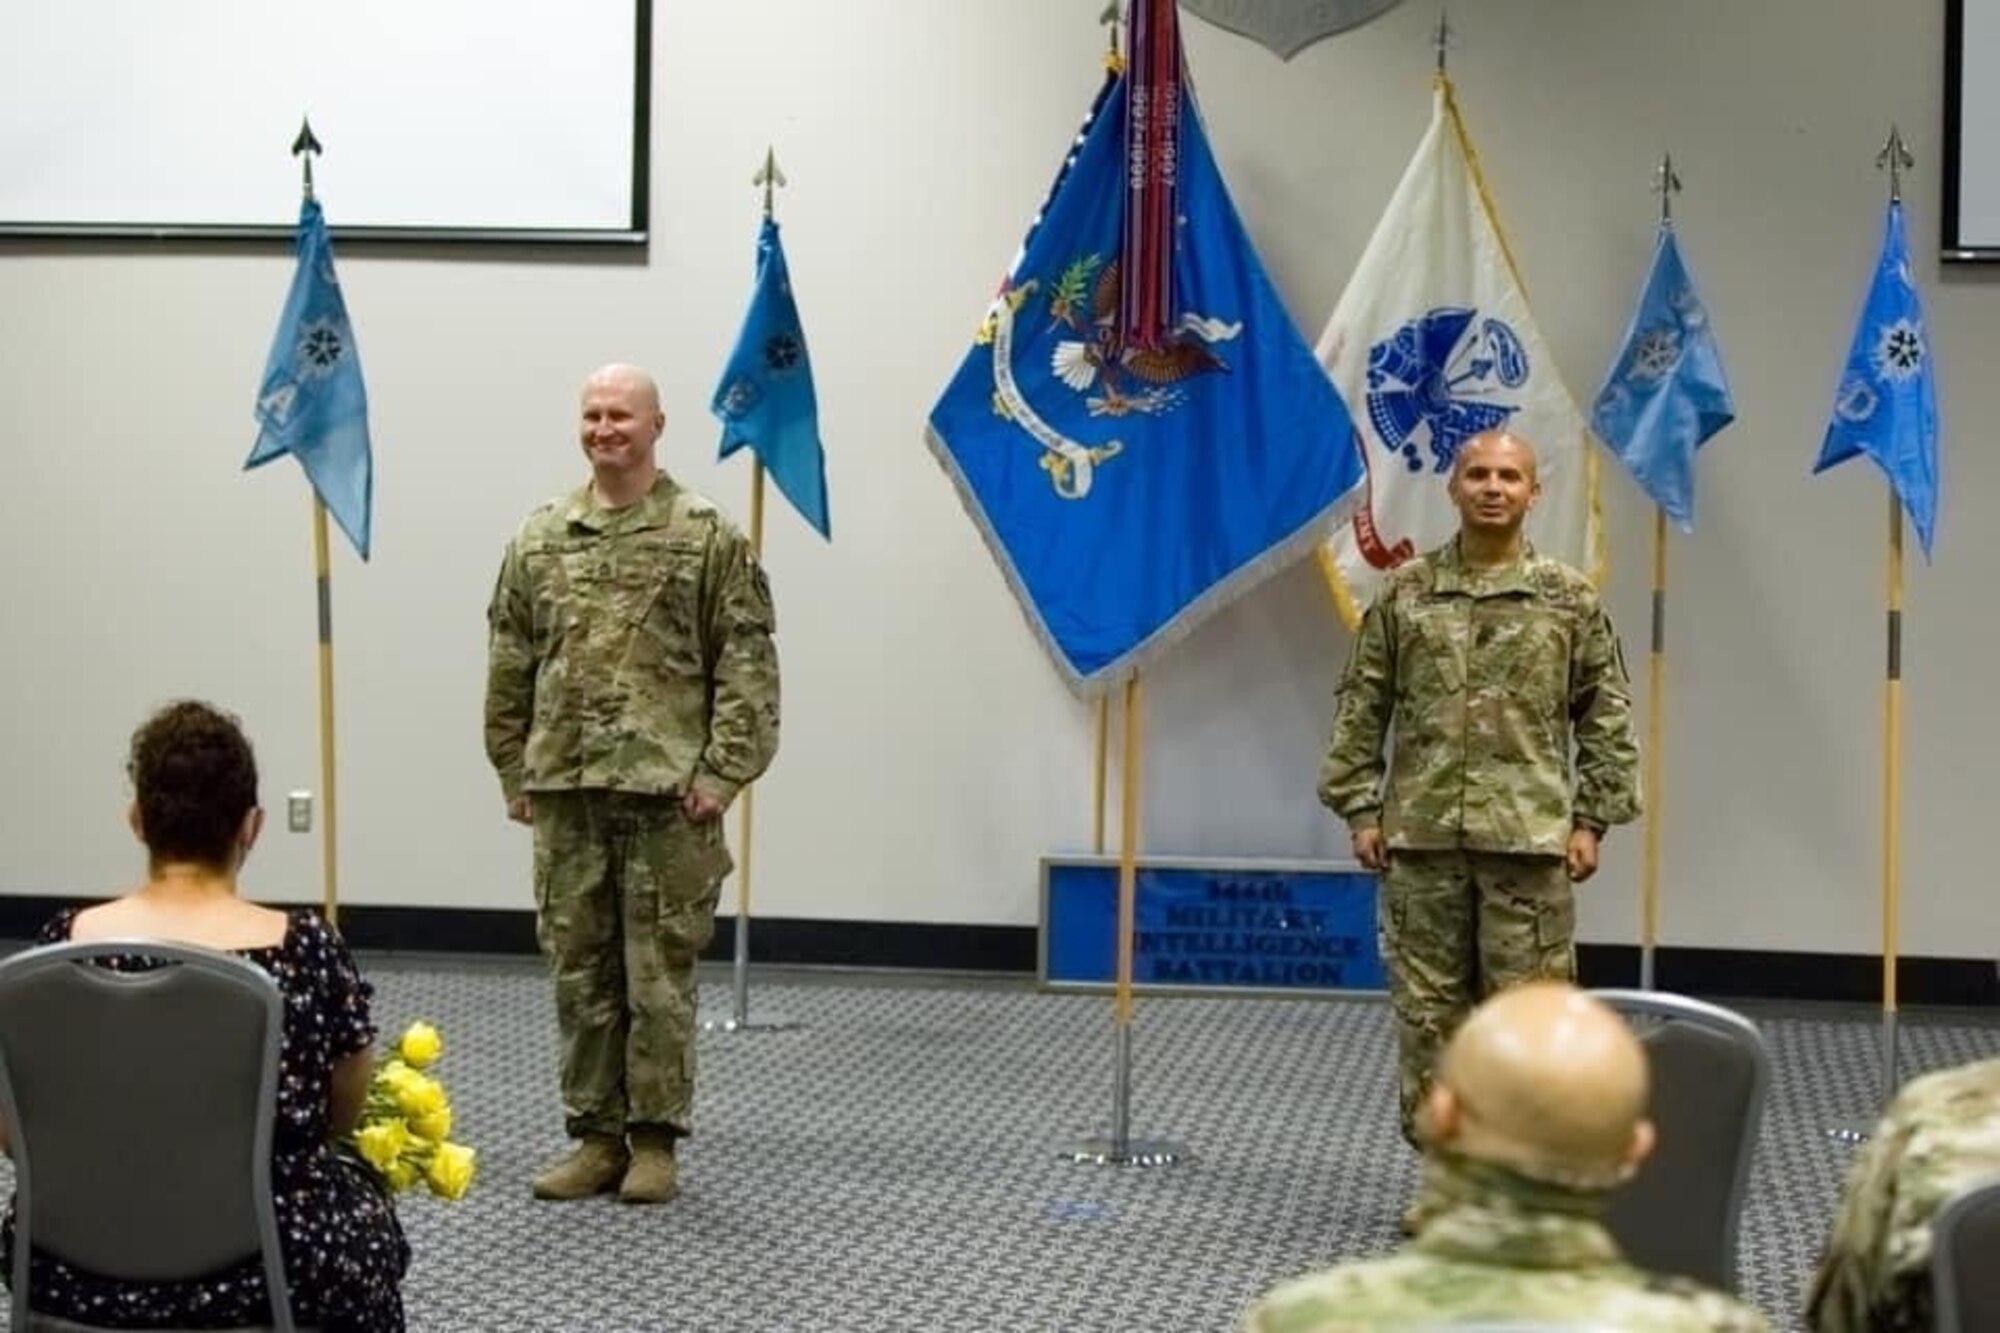 U.S. Army Command Sgt. Major Jason Lauer assumes responsibility of the 344th Military Intelligence Battalion as the senior enlisted advisor at the event center on Goodfellow Air Force Base, Texas, July 24, 2020. The change of responsibility is a time honored tradition within the Army allowing Soldiers to say farewell to one leader and welcome in another. (Courtesy photo)